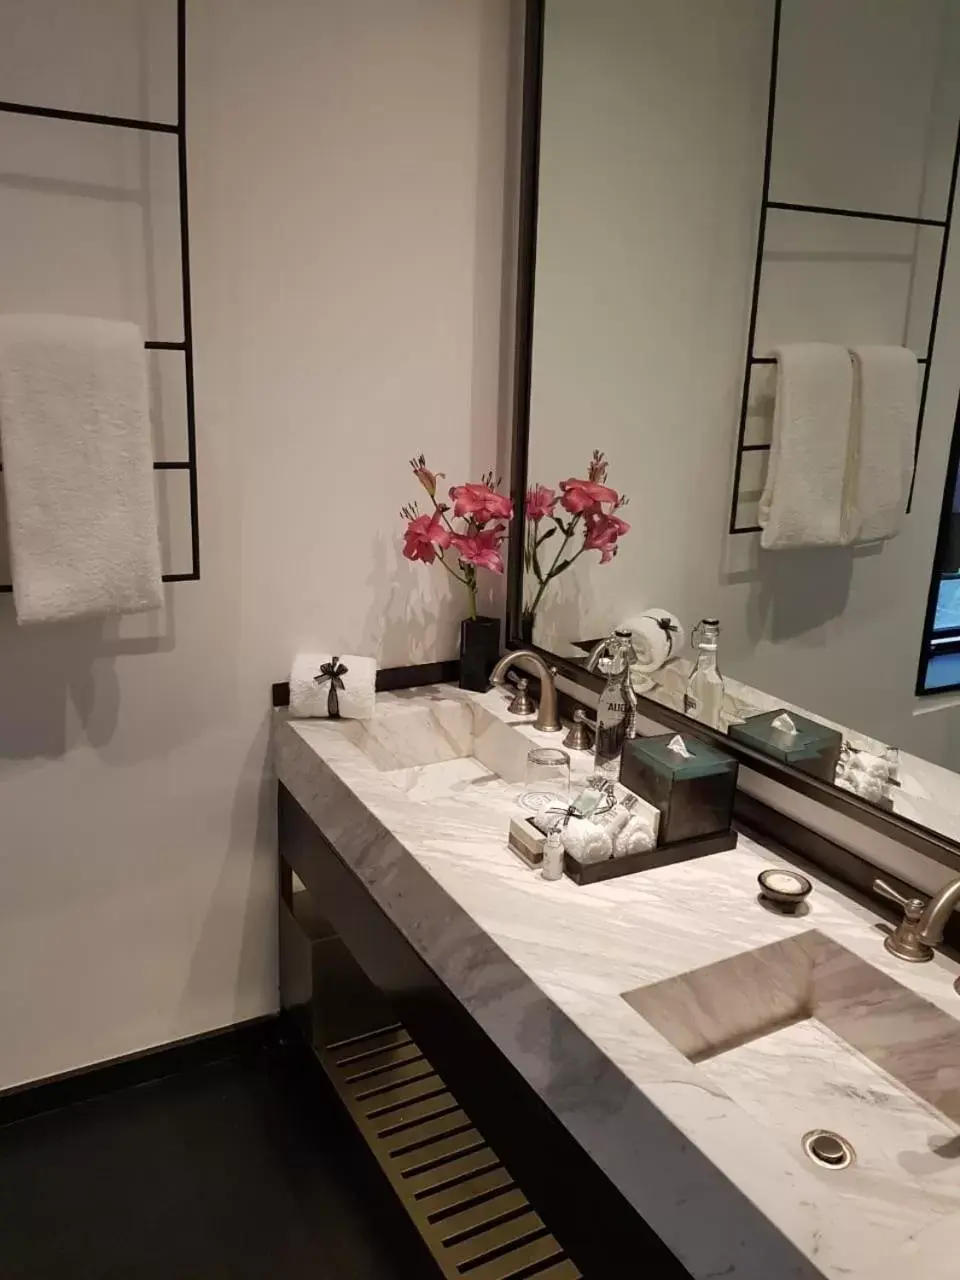 Bathroom in Brick Hotel Mexico City - Small Luxury Hotels of the World